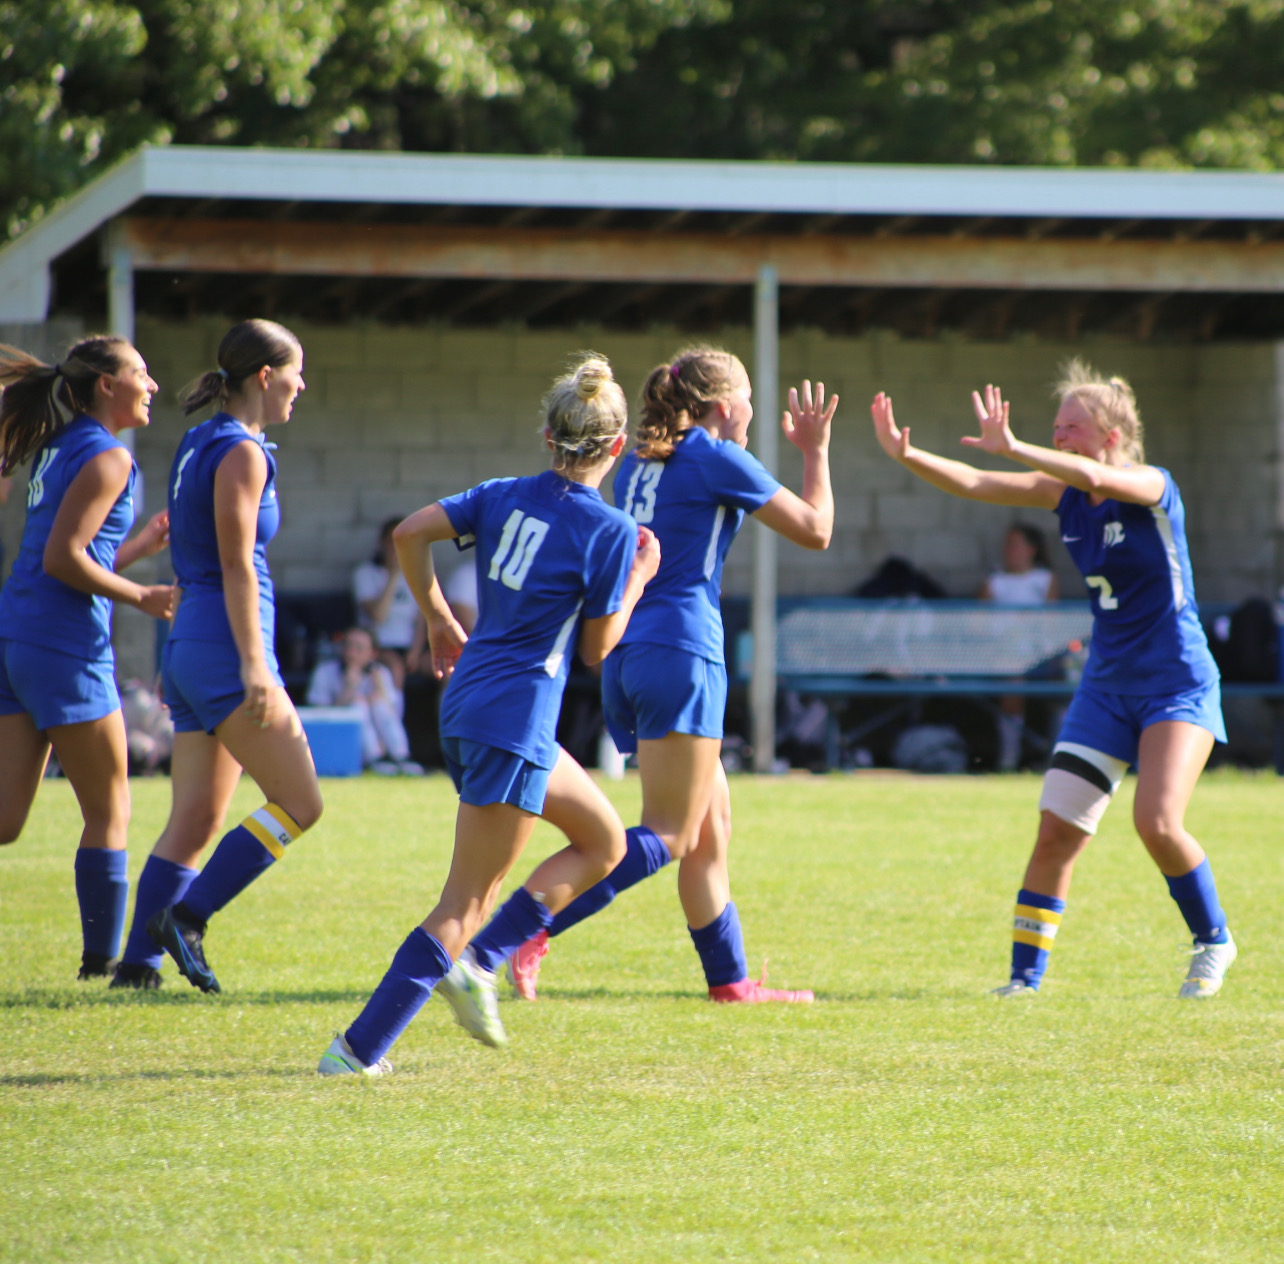 Montague advances to soccer district final with convincing victory over Manistee